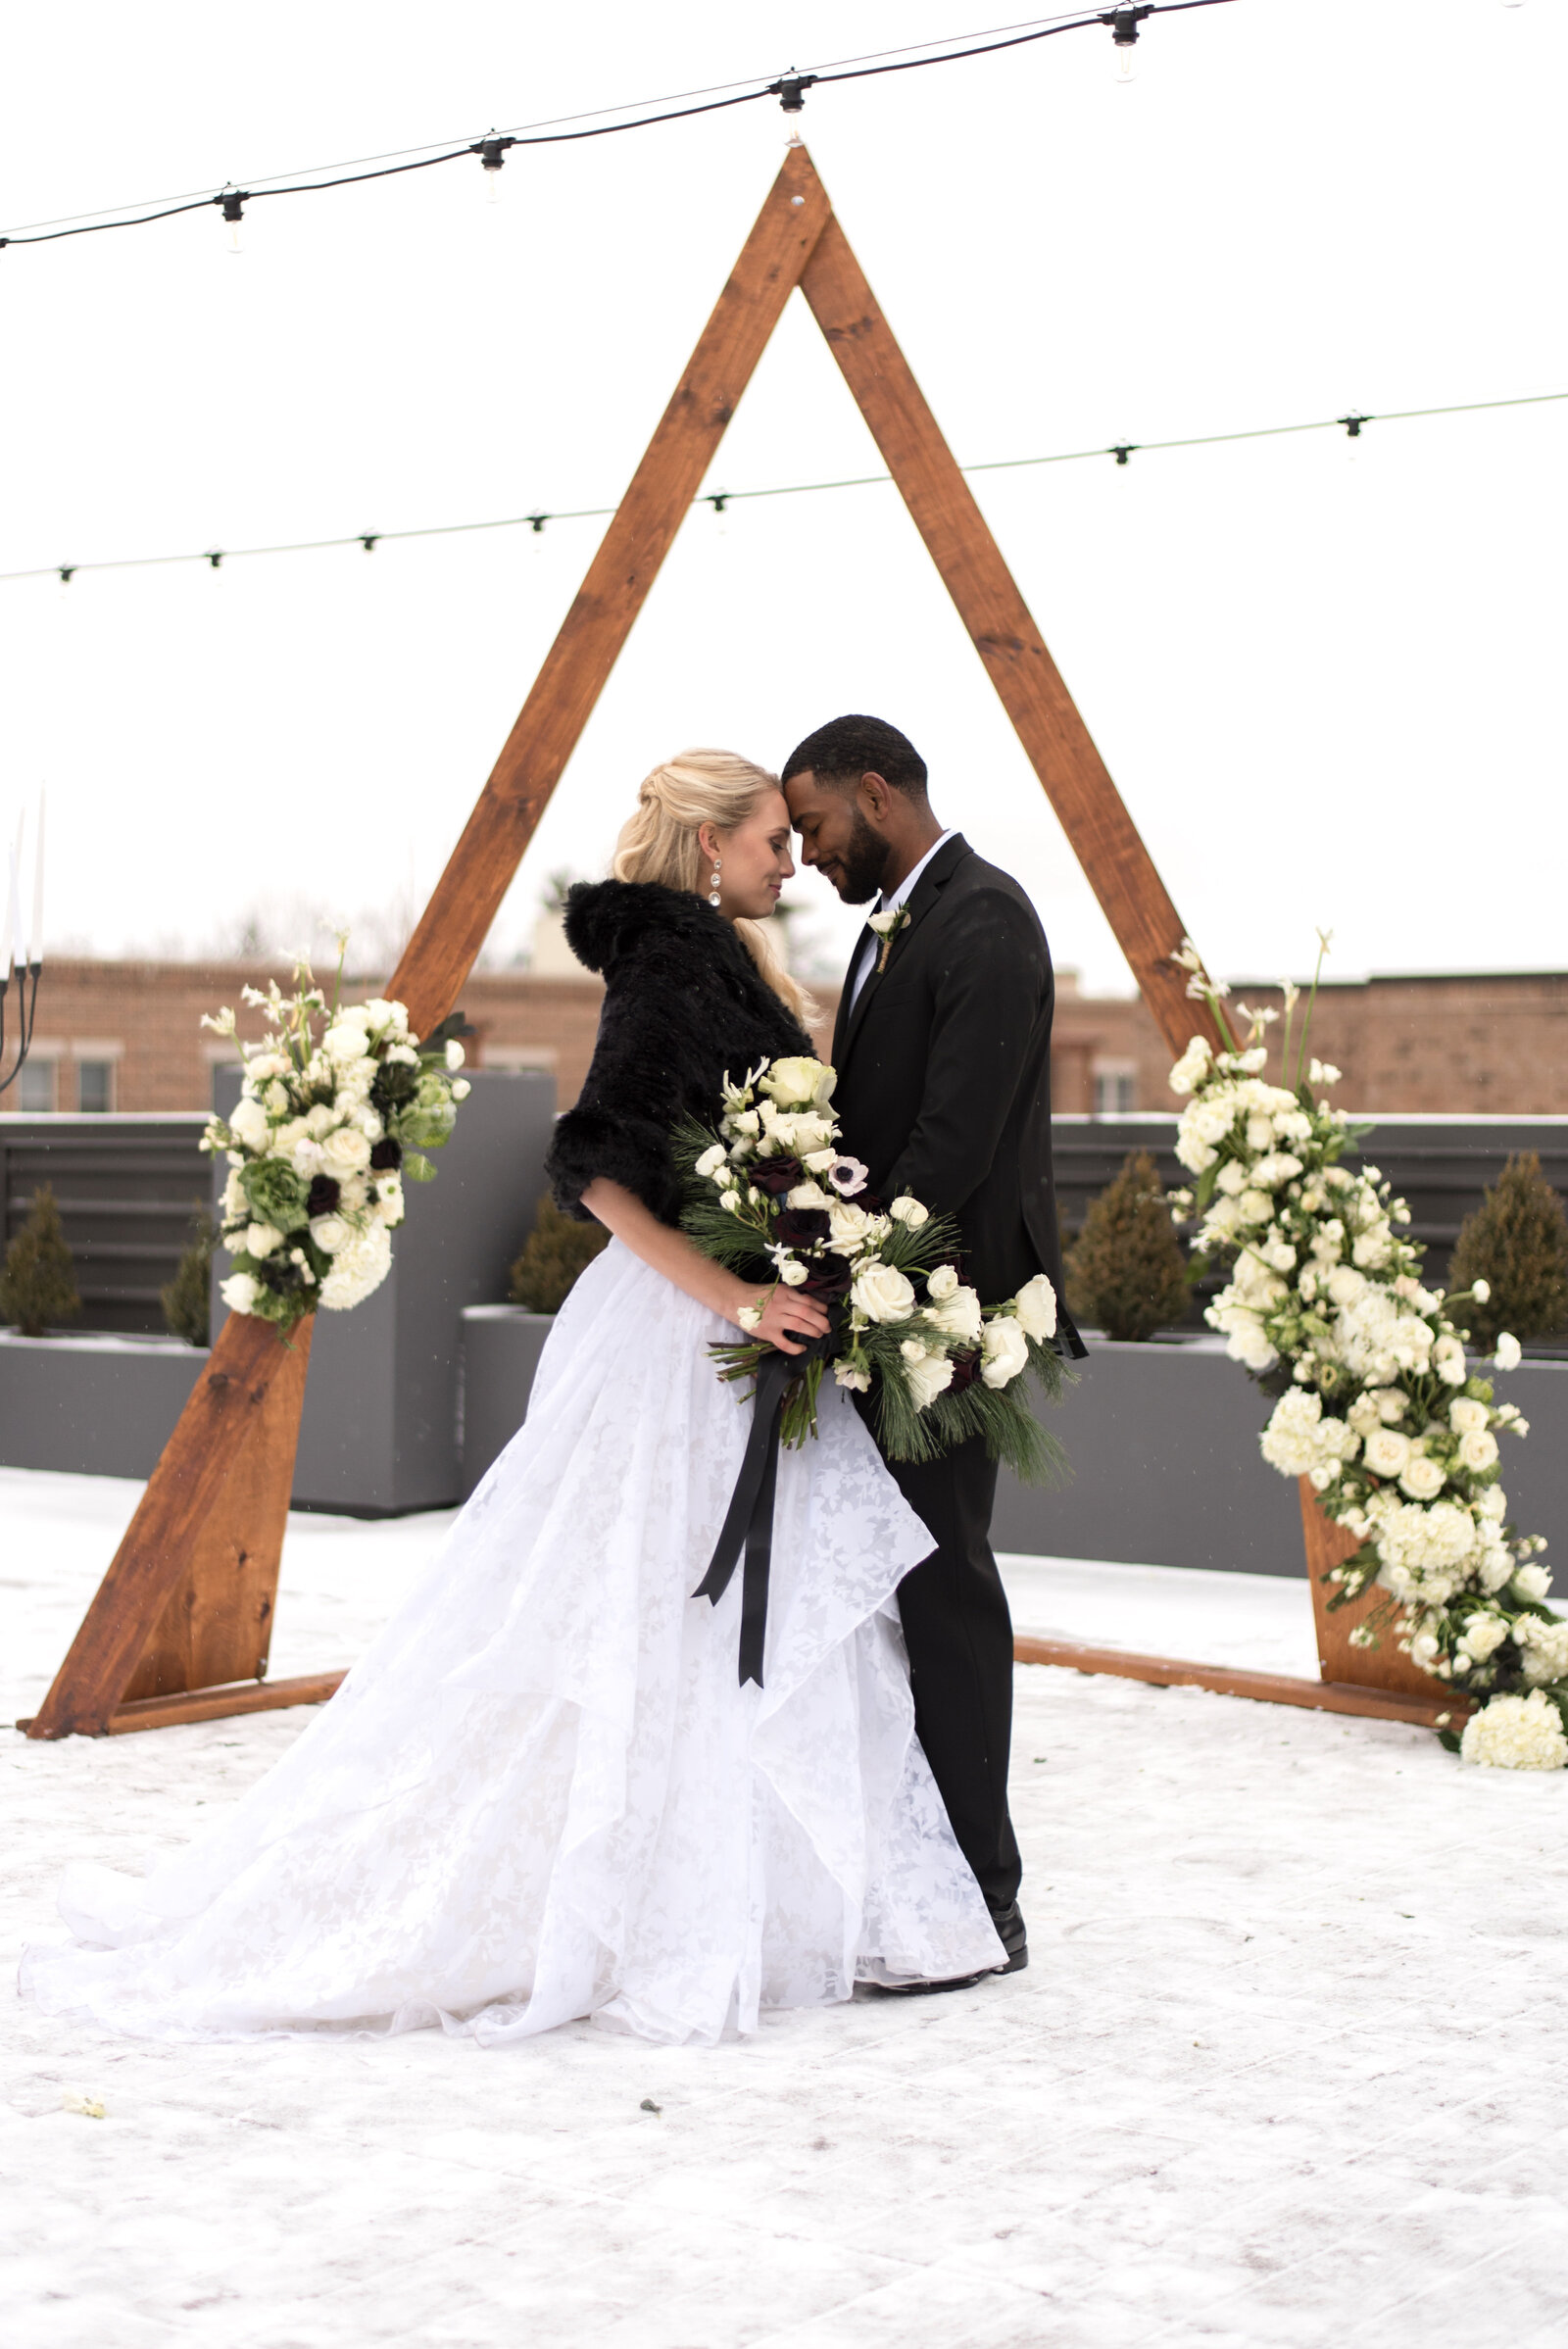 Bride and groom on rooftop in winter